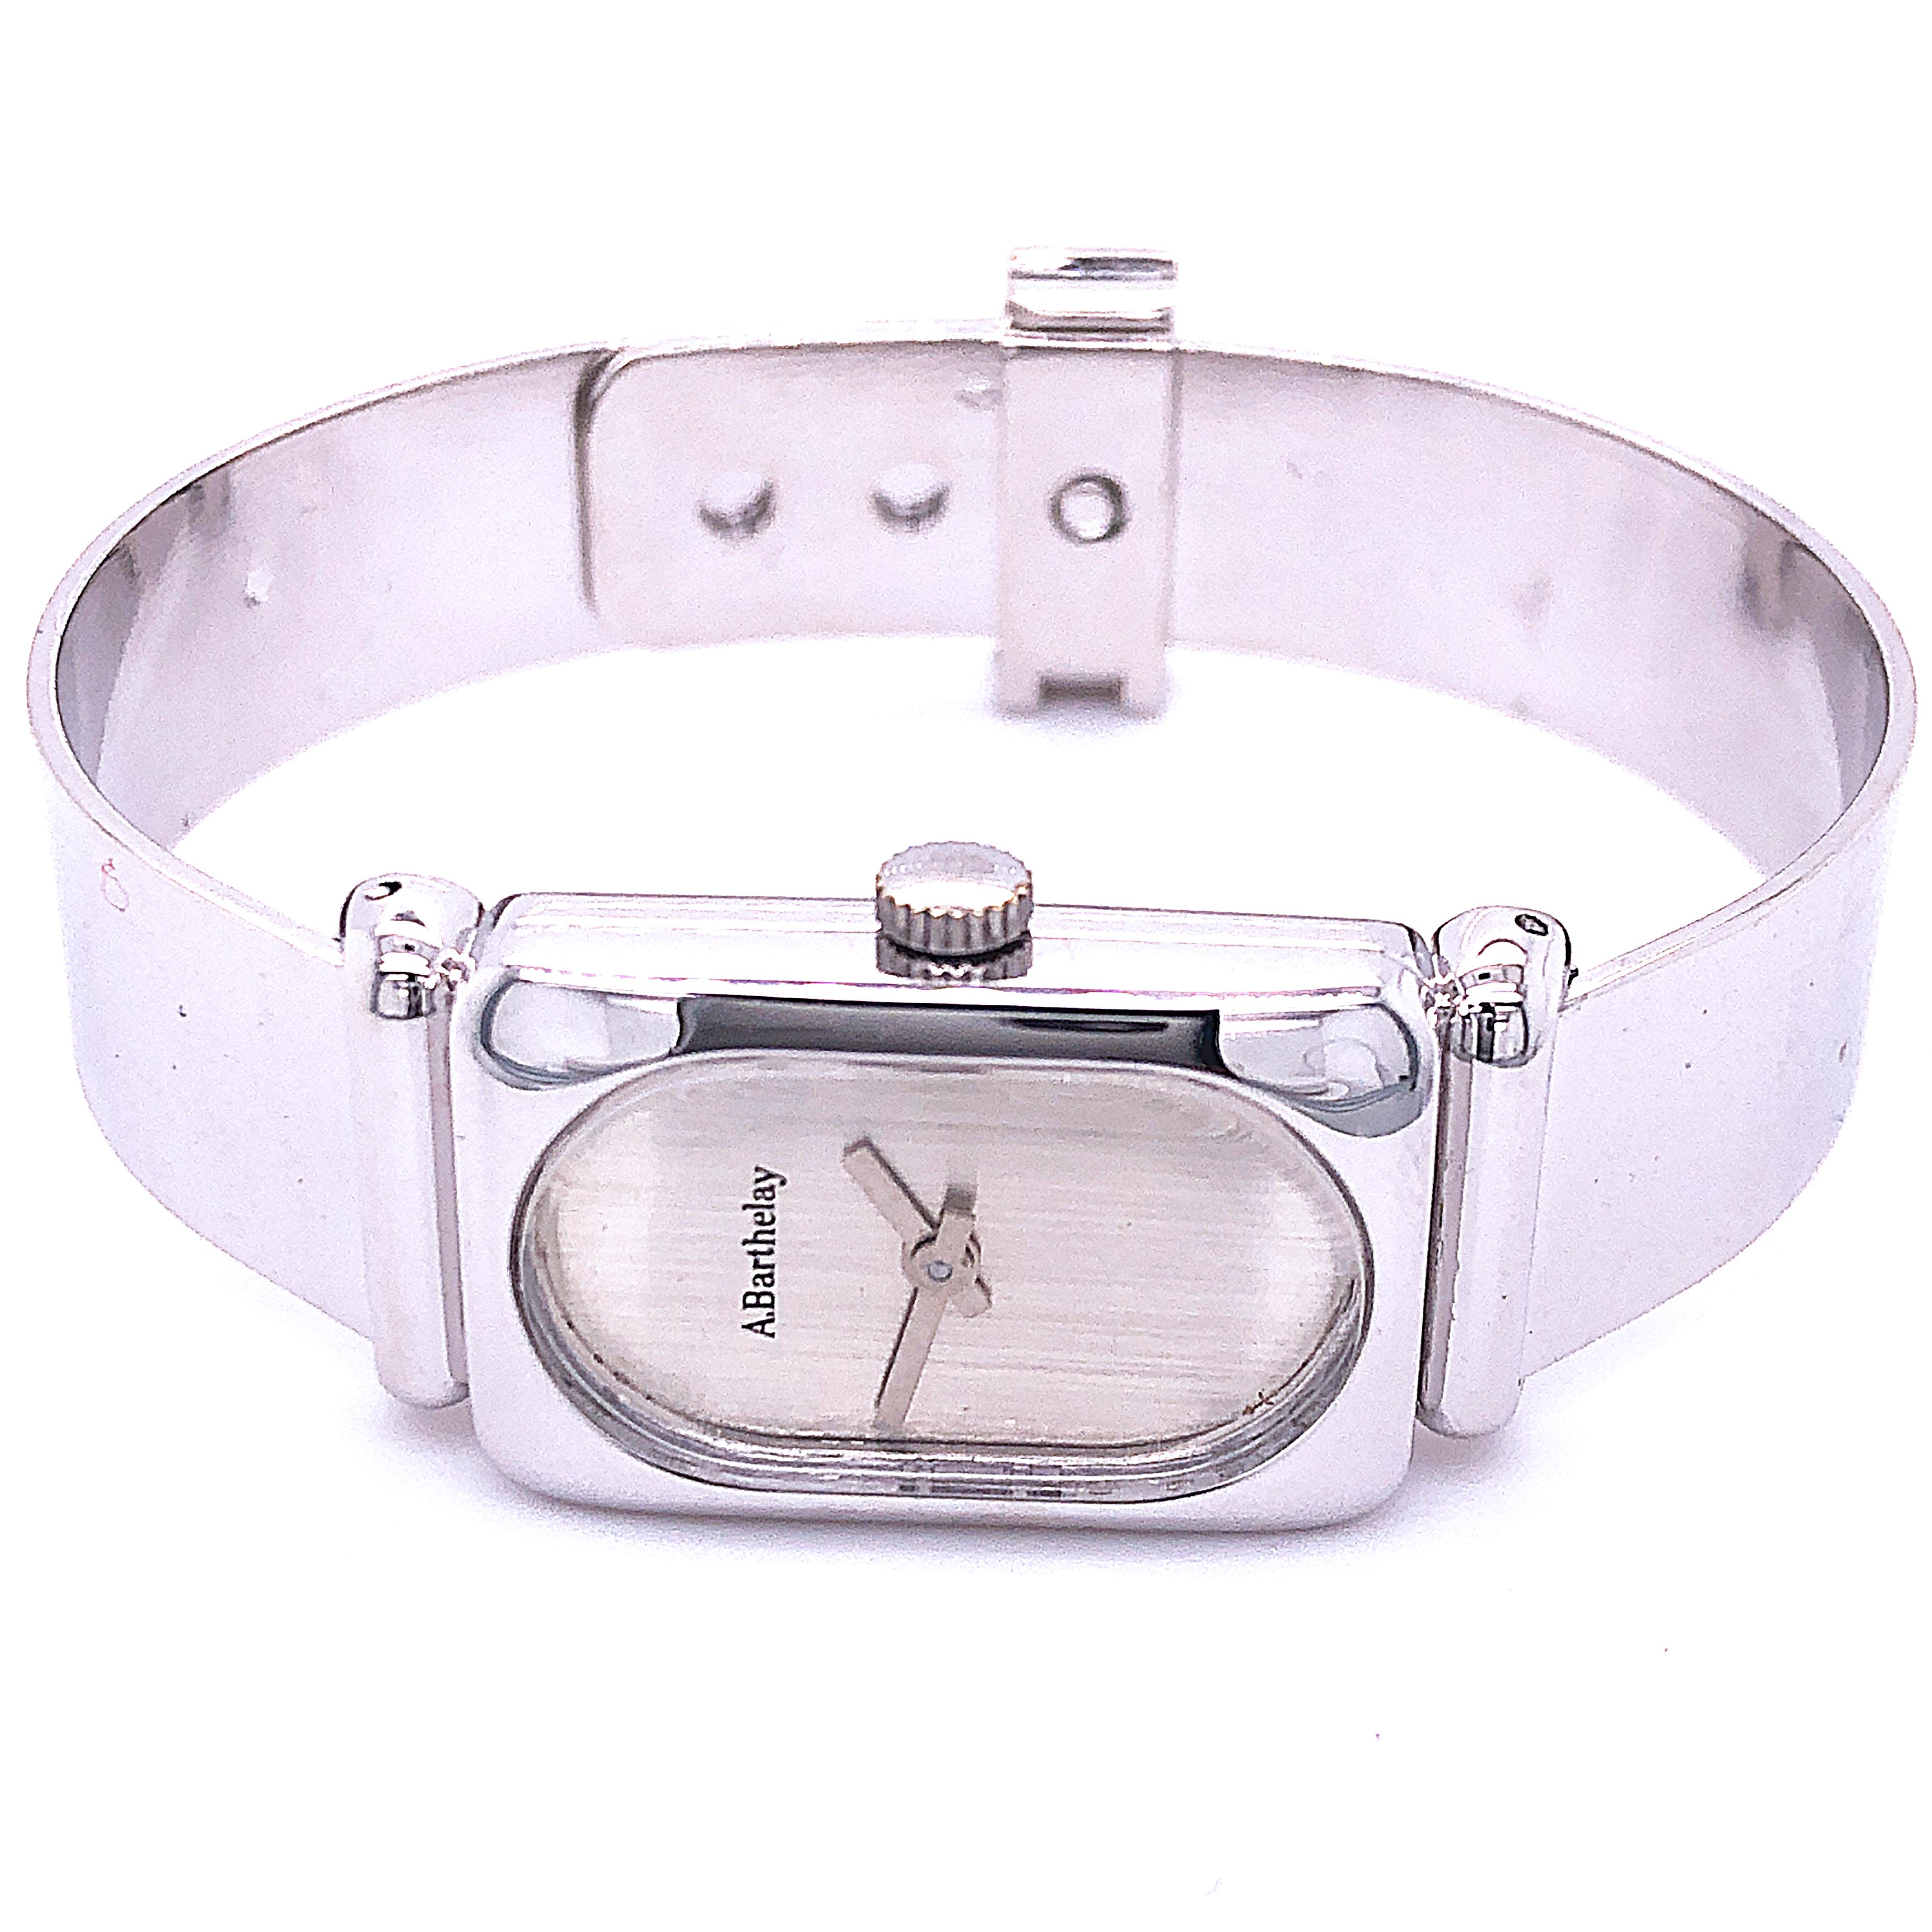 Original 1974, Exquisite Alexis Barthelay Bangle Solid Silver Watch, a special piece characterized by an elegant, unique, absolutely chic yet timeless design.
This iconic watch is fully functional, in excellent condition with no traces of wear: it